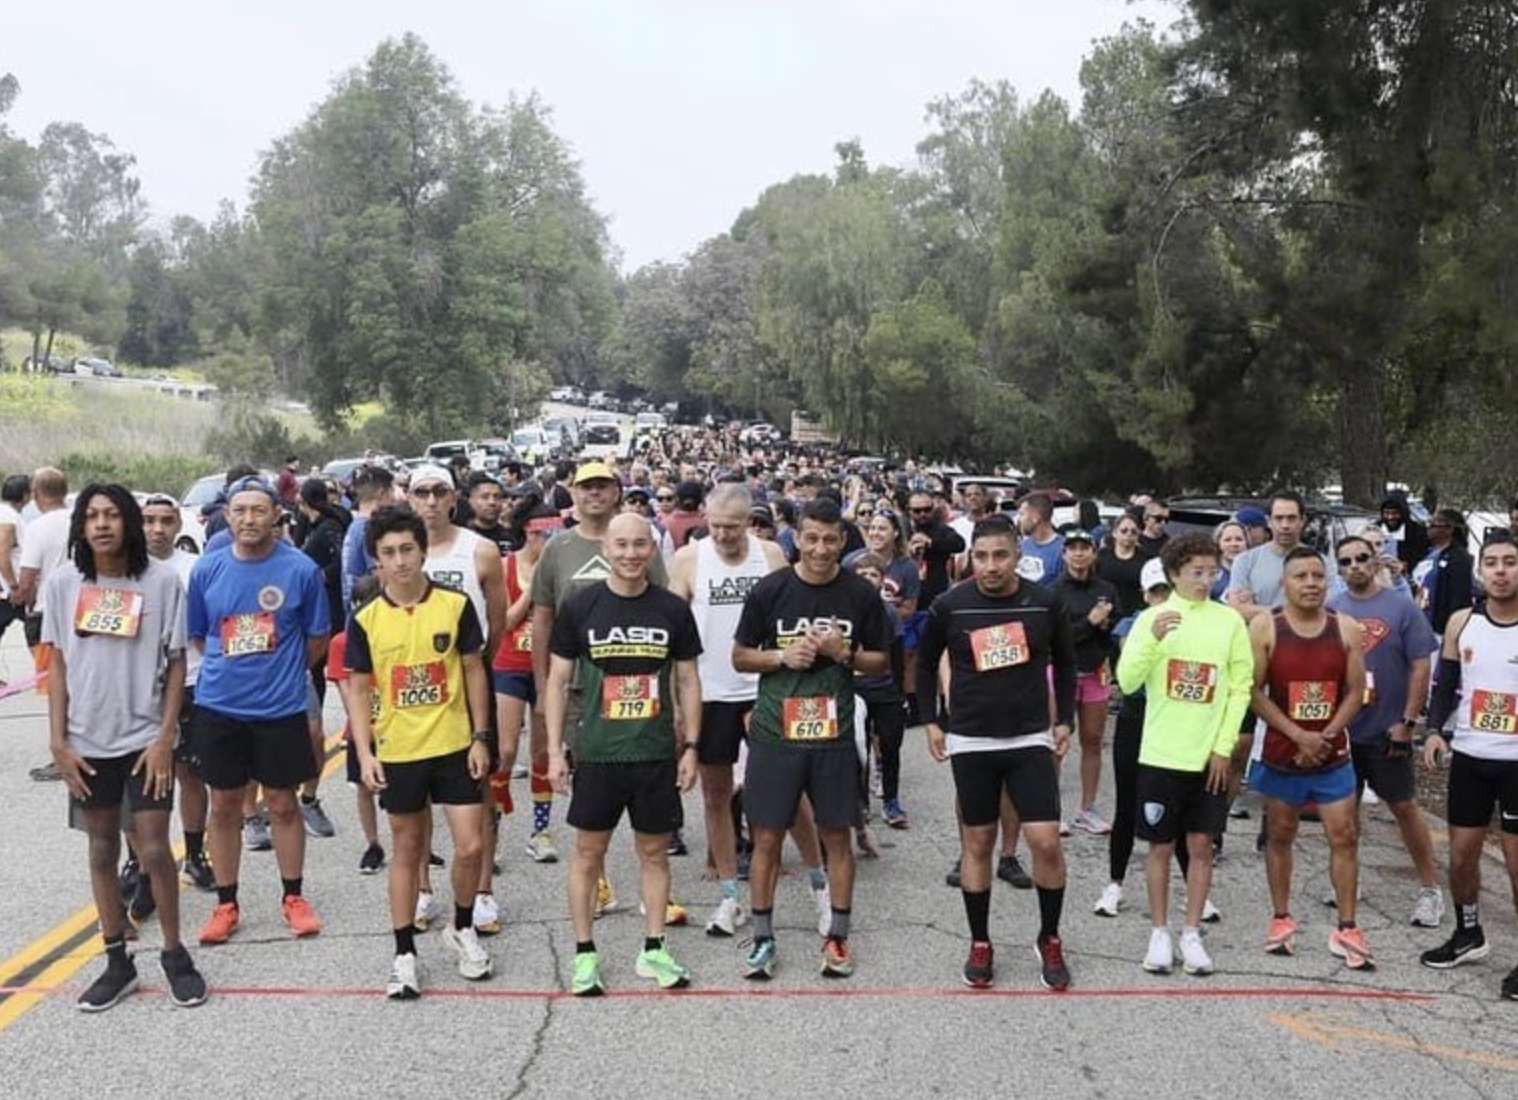 hundreds of people are standing at a starting line, the paved course is lined by large tall trees, all the people are dressed in running shirts, shorts and shoes.